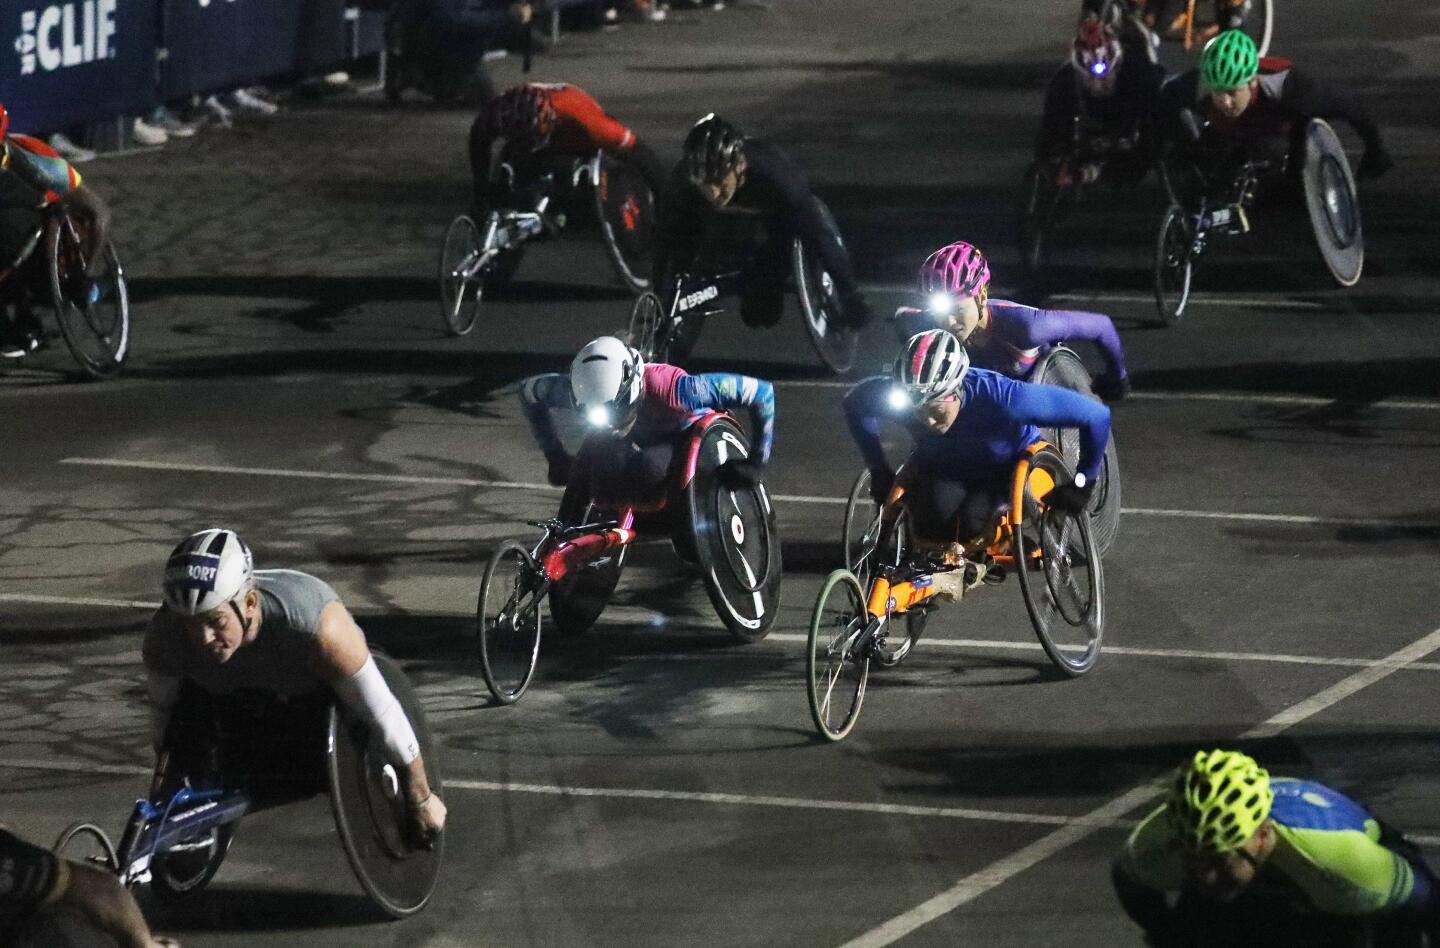 Wheelchair participants in the 2020 L.A. Marathon were underway before the sun came up.